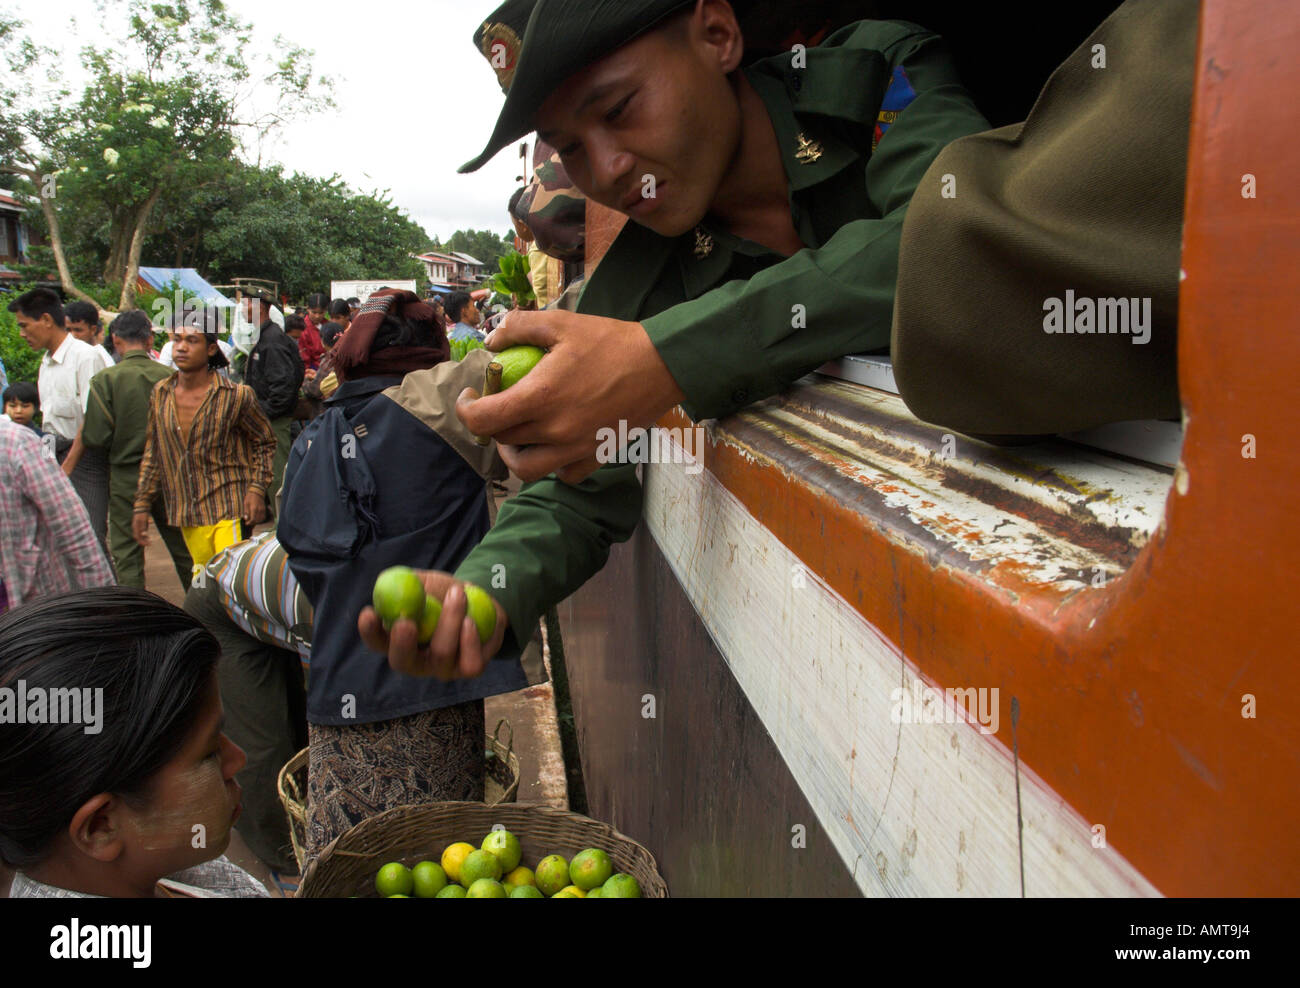 Myanmar Burma Shan State Train trip between Thazi and Kalaw Mindhaik station soldier at train window checking out lemon for sale Stock Photo